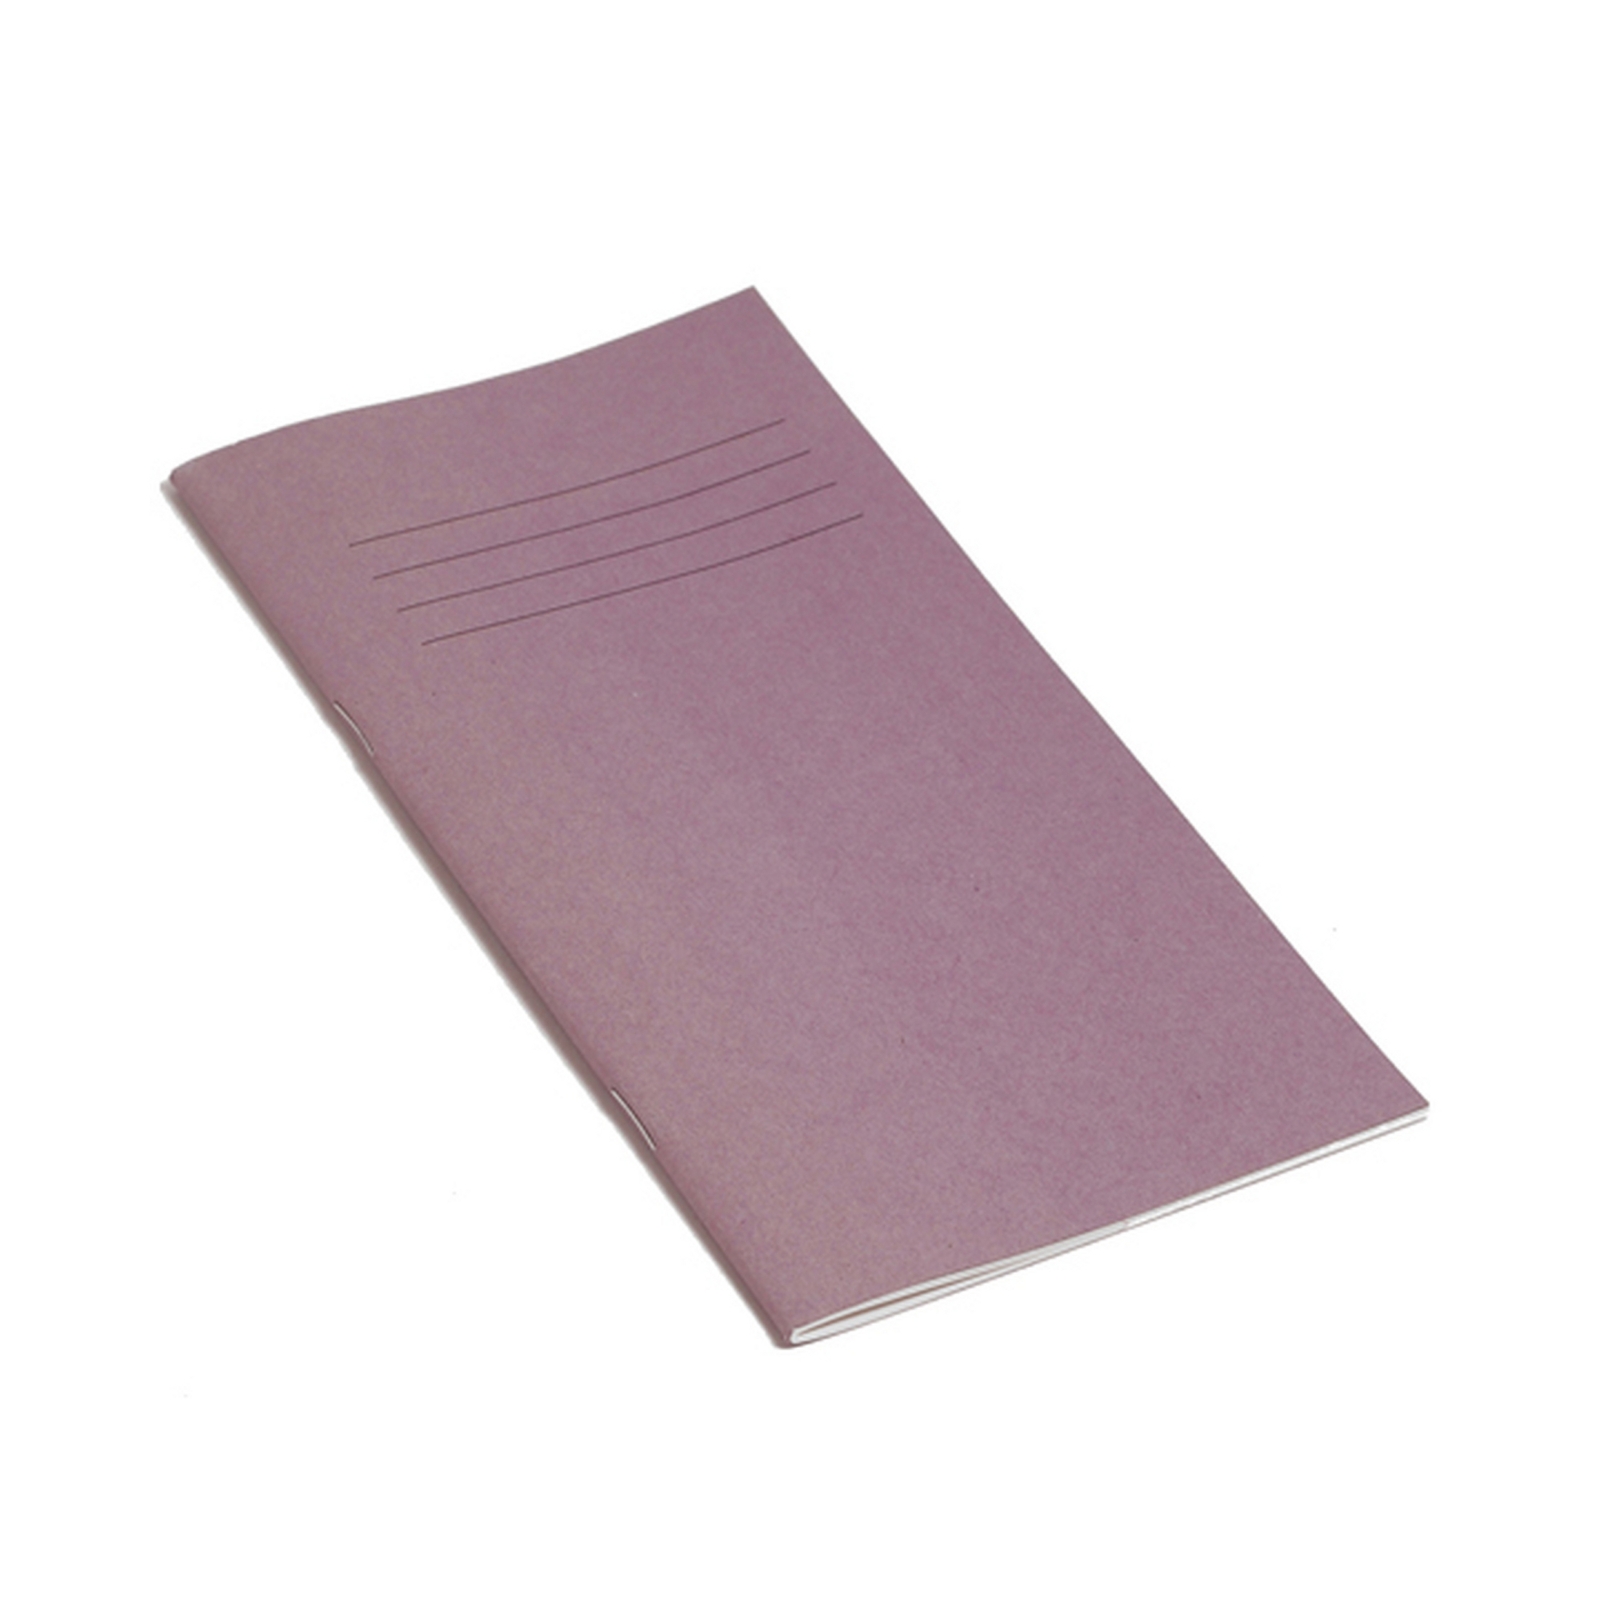 8 x 4"/200 x 100mm Purple Cover 8mm Ruled with Centre Margin Vocabulary Book - 32 Page - Pack of 100